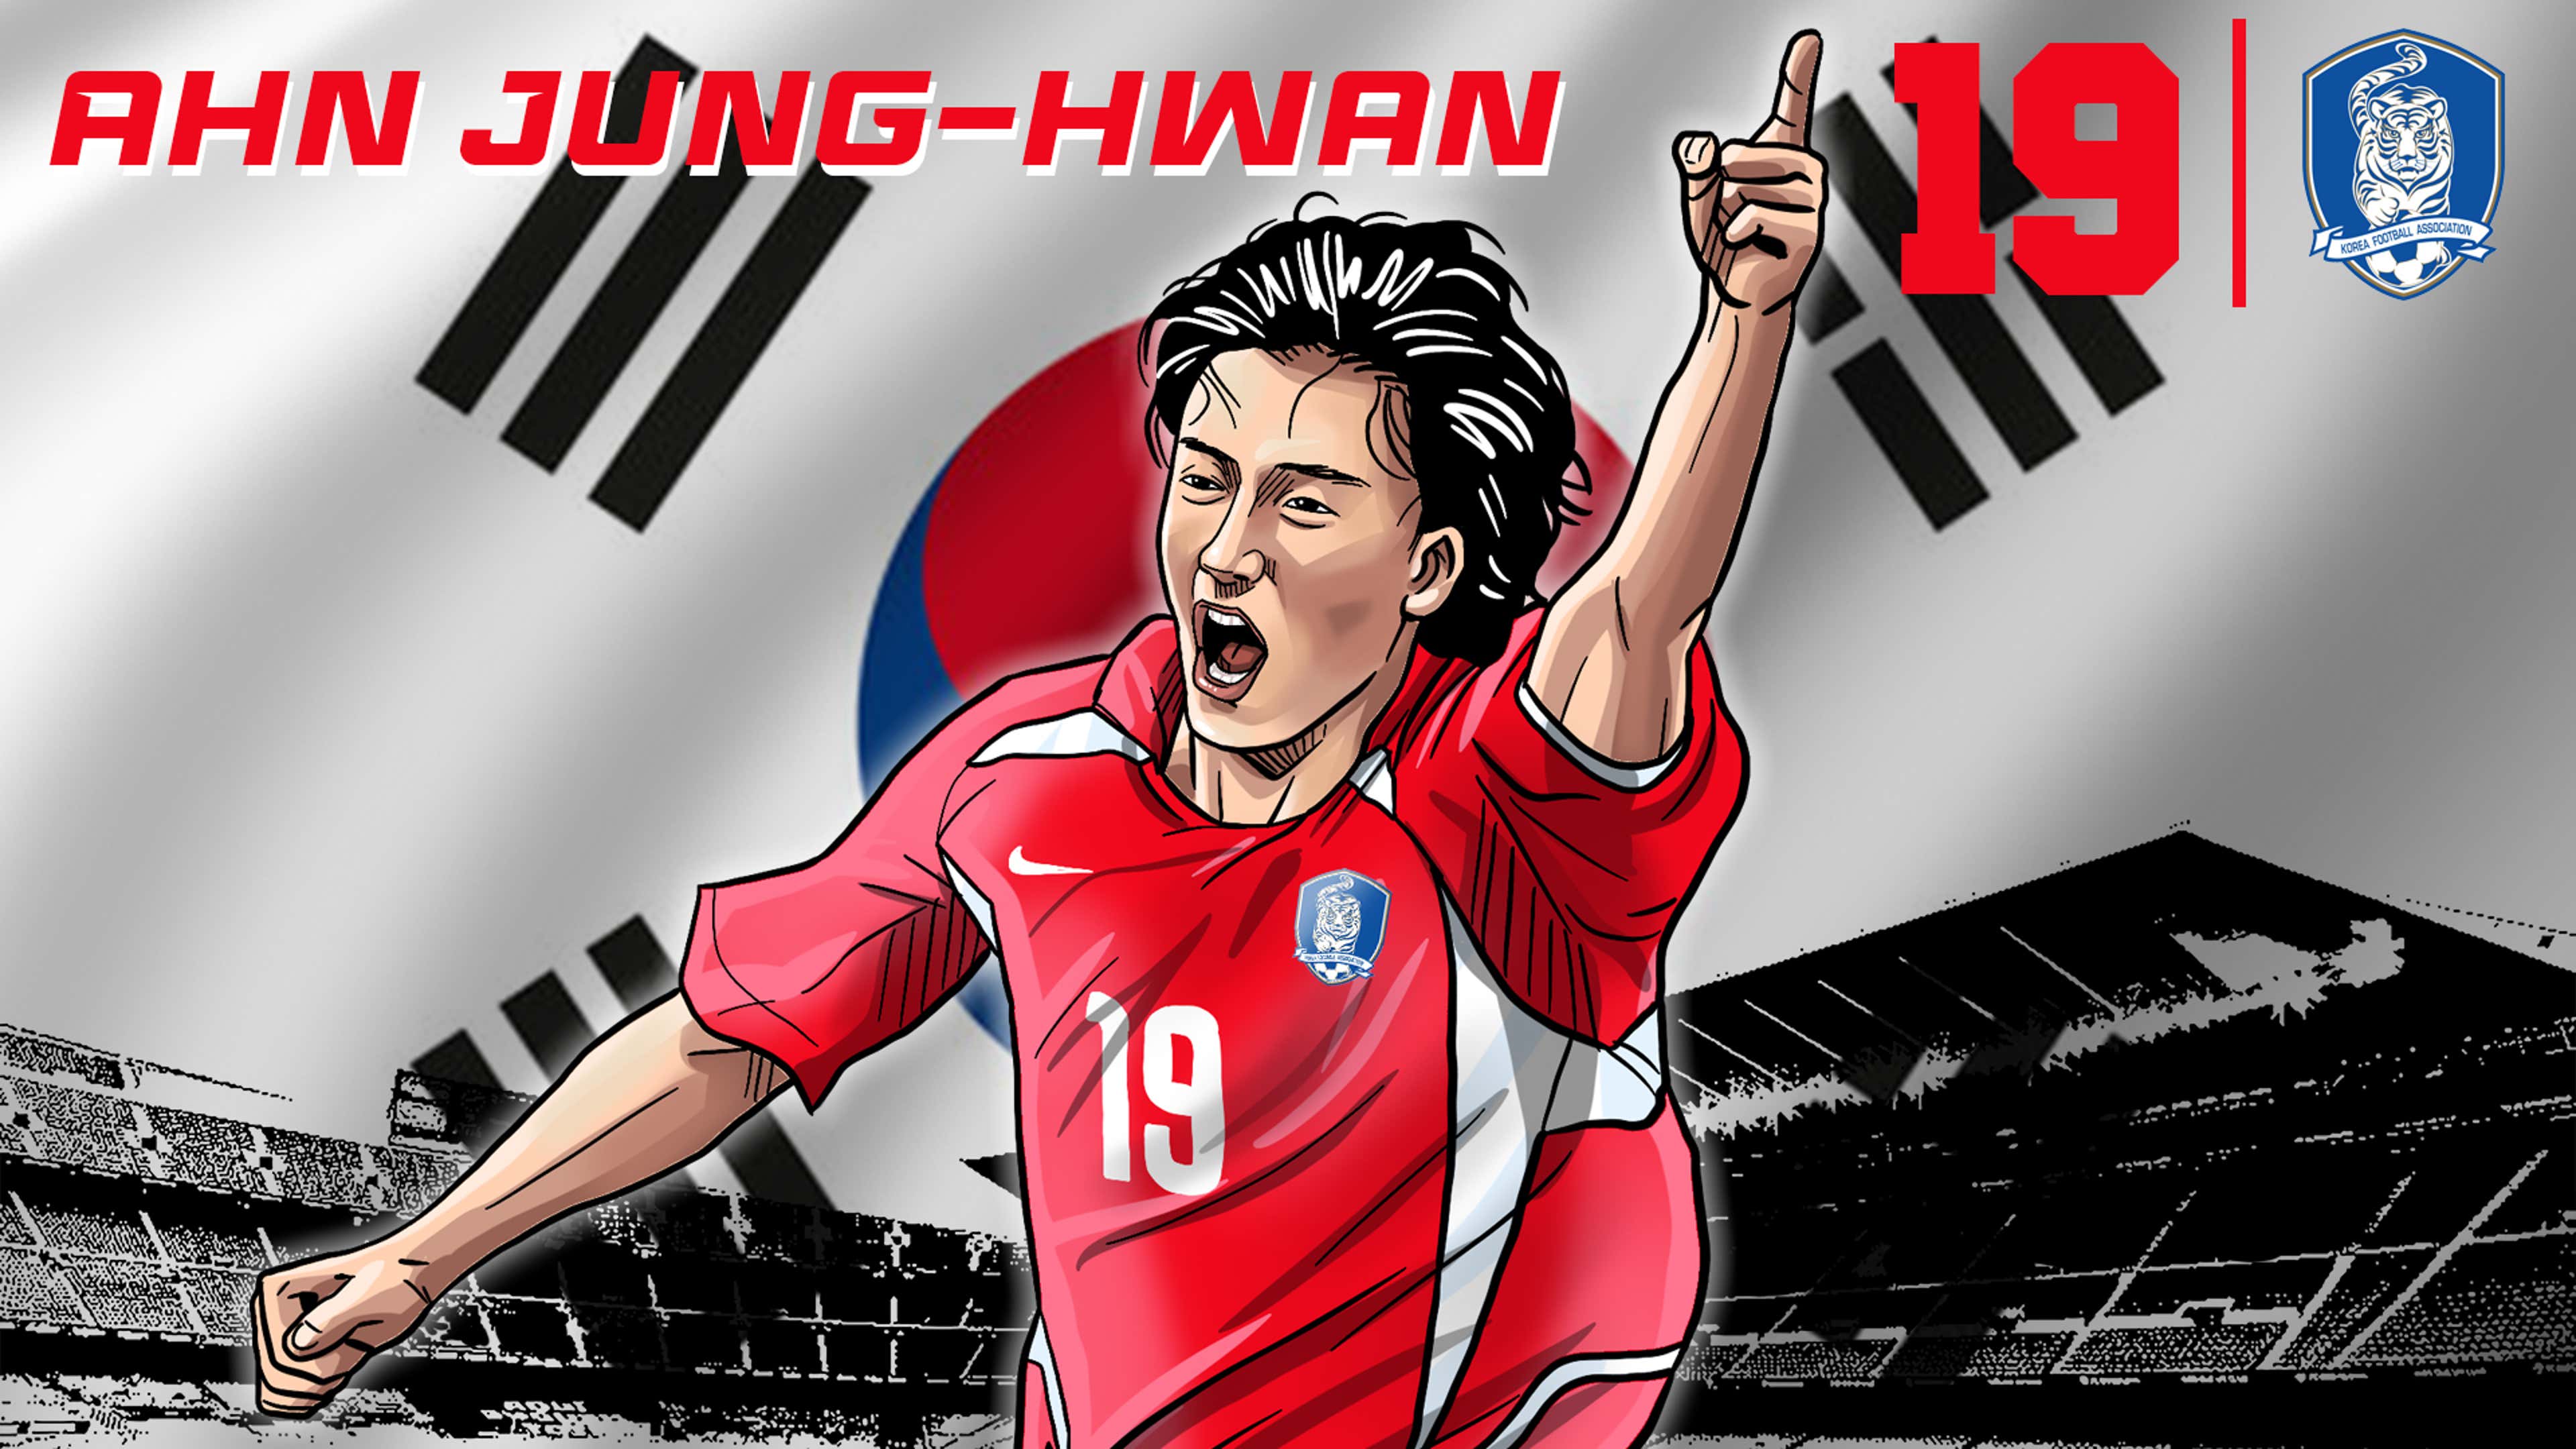 That man will never set foot in Perugia again!' - Ahn Jung-hwan & the  golden goal that sent South Korea wild but caused uproar in Italy